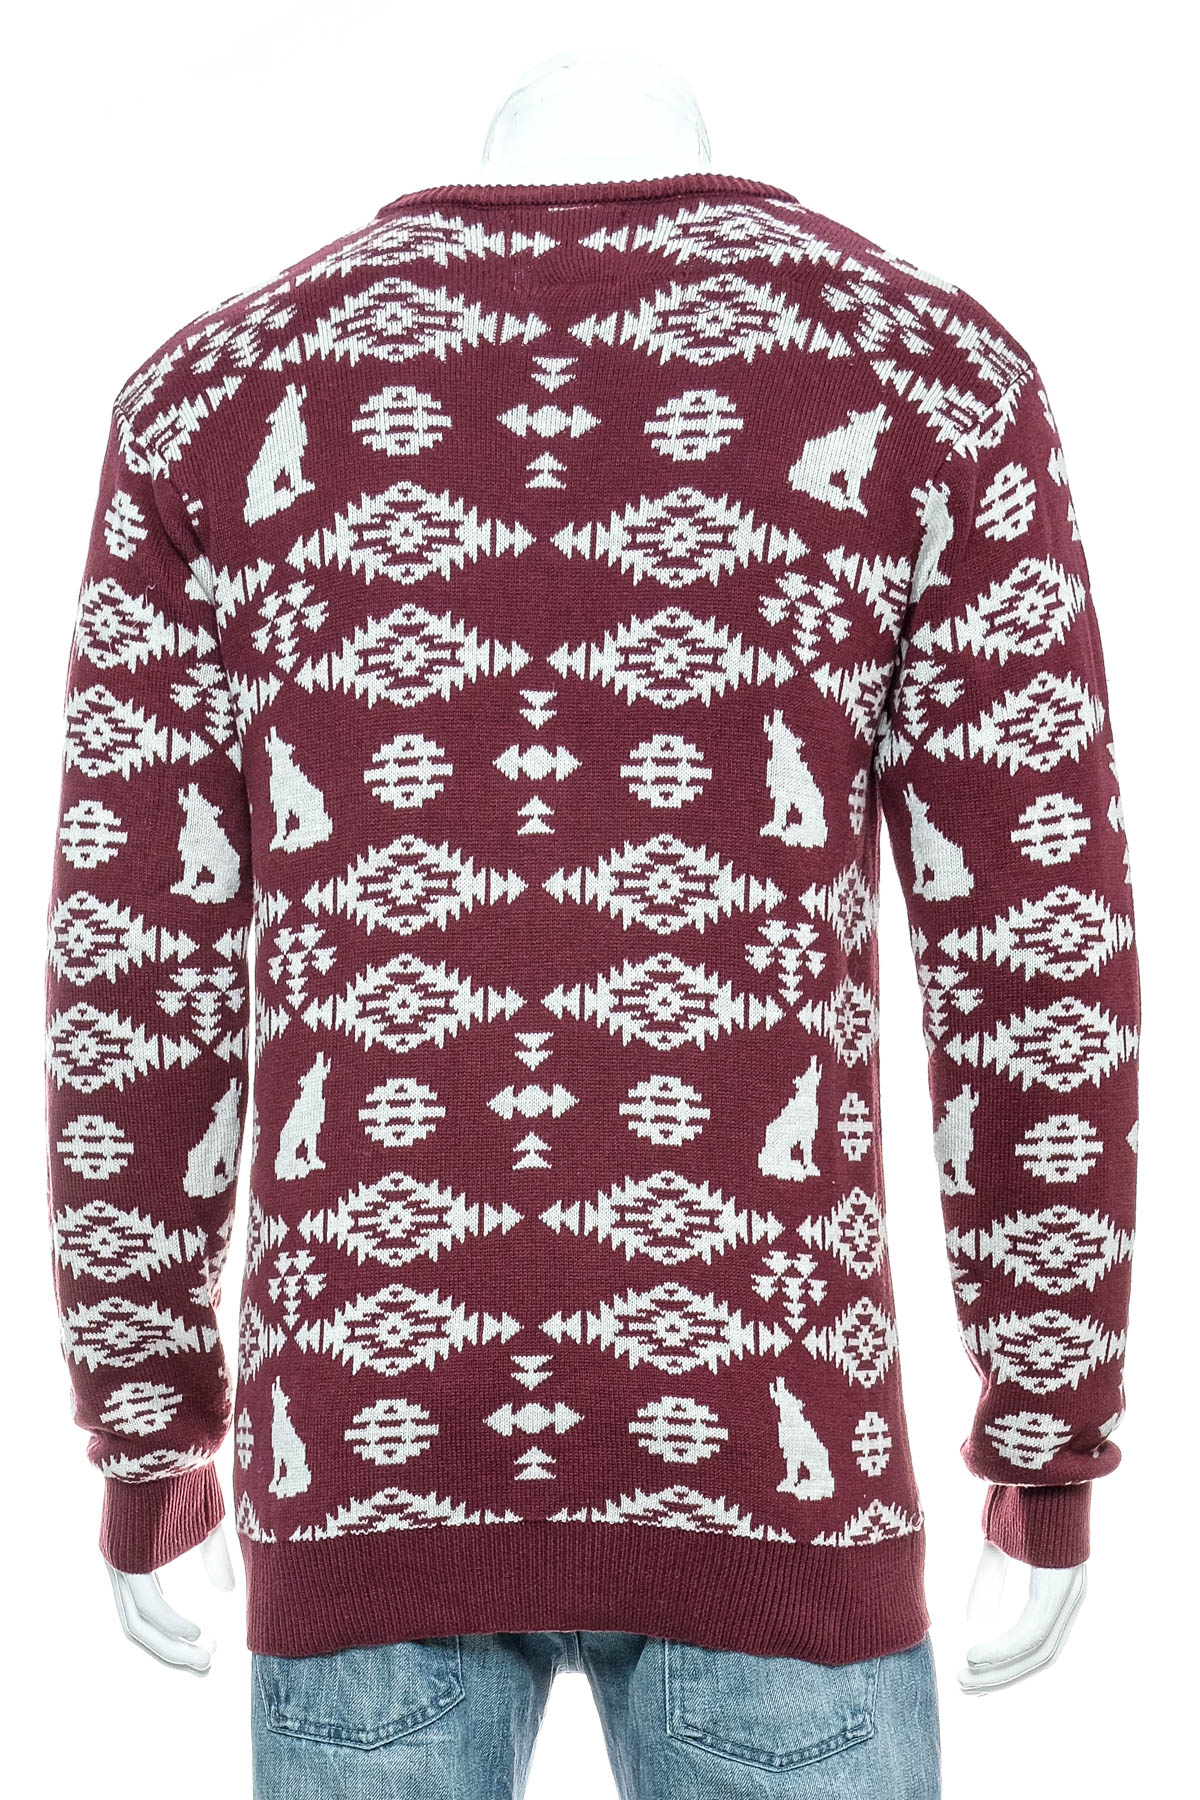 Men's sweater - ON THE BYAS - 1